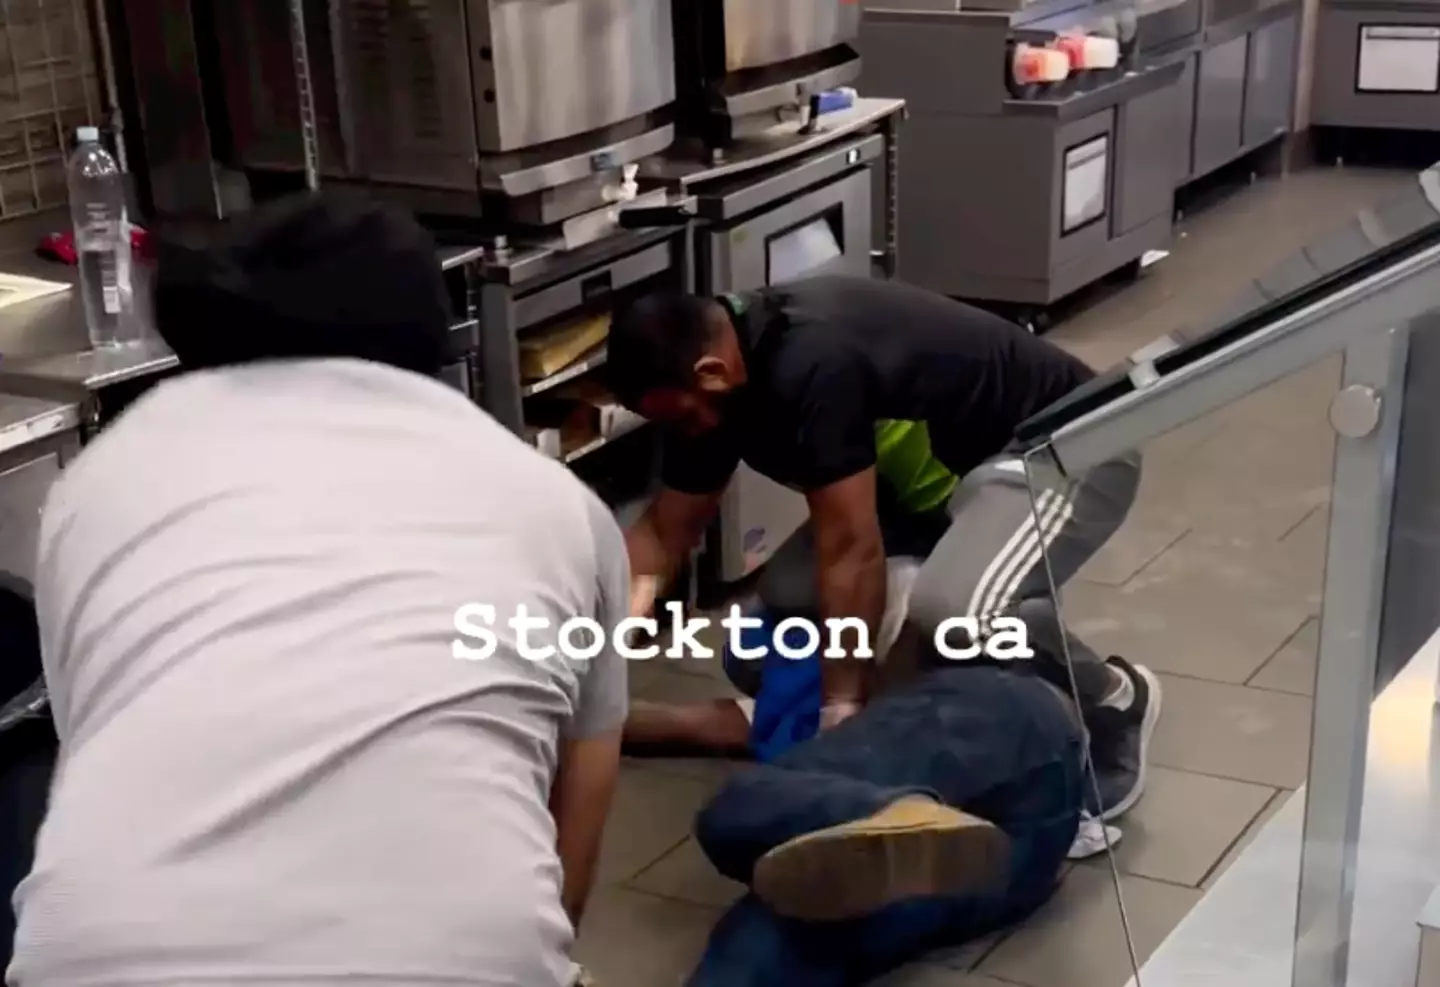 The employees began beating the robber with a stick.